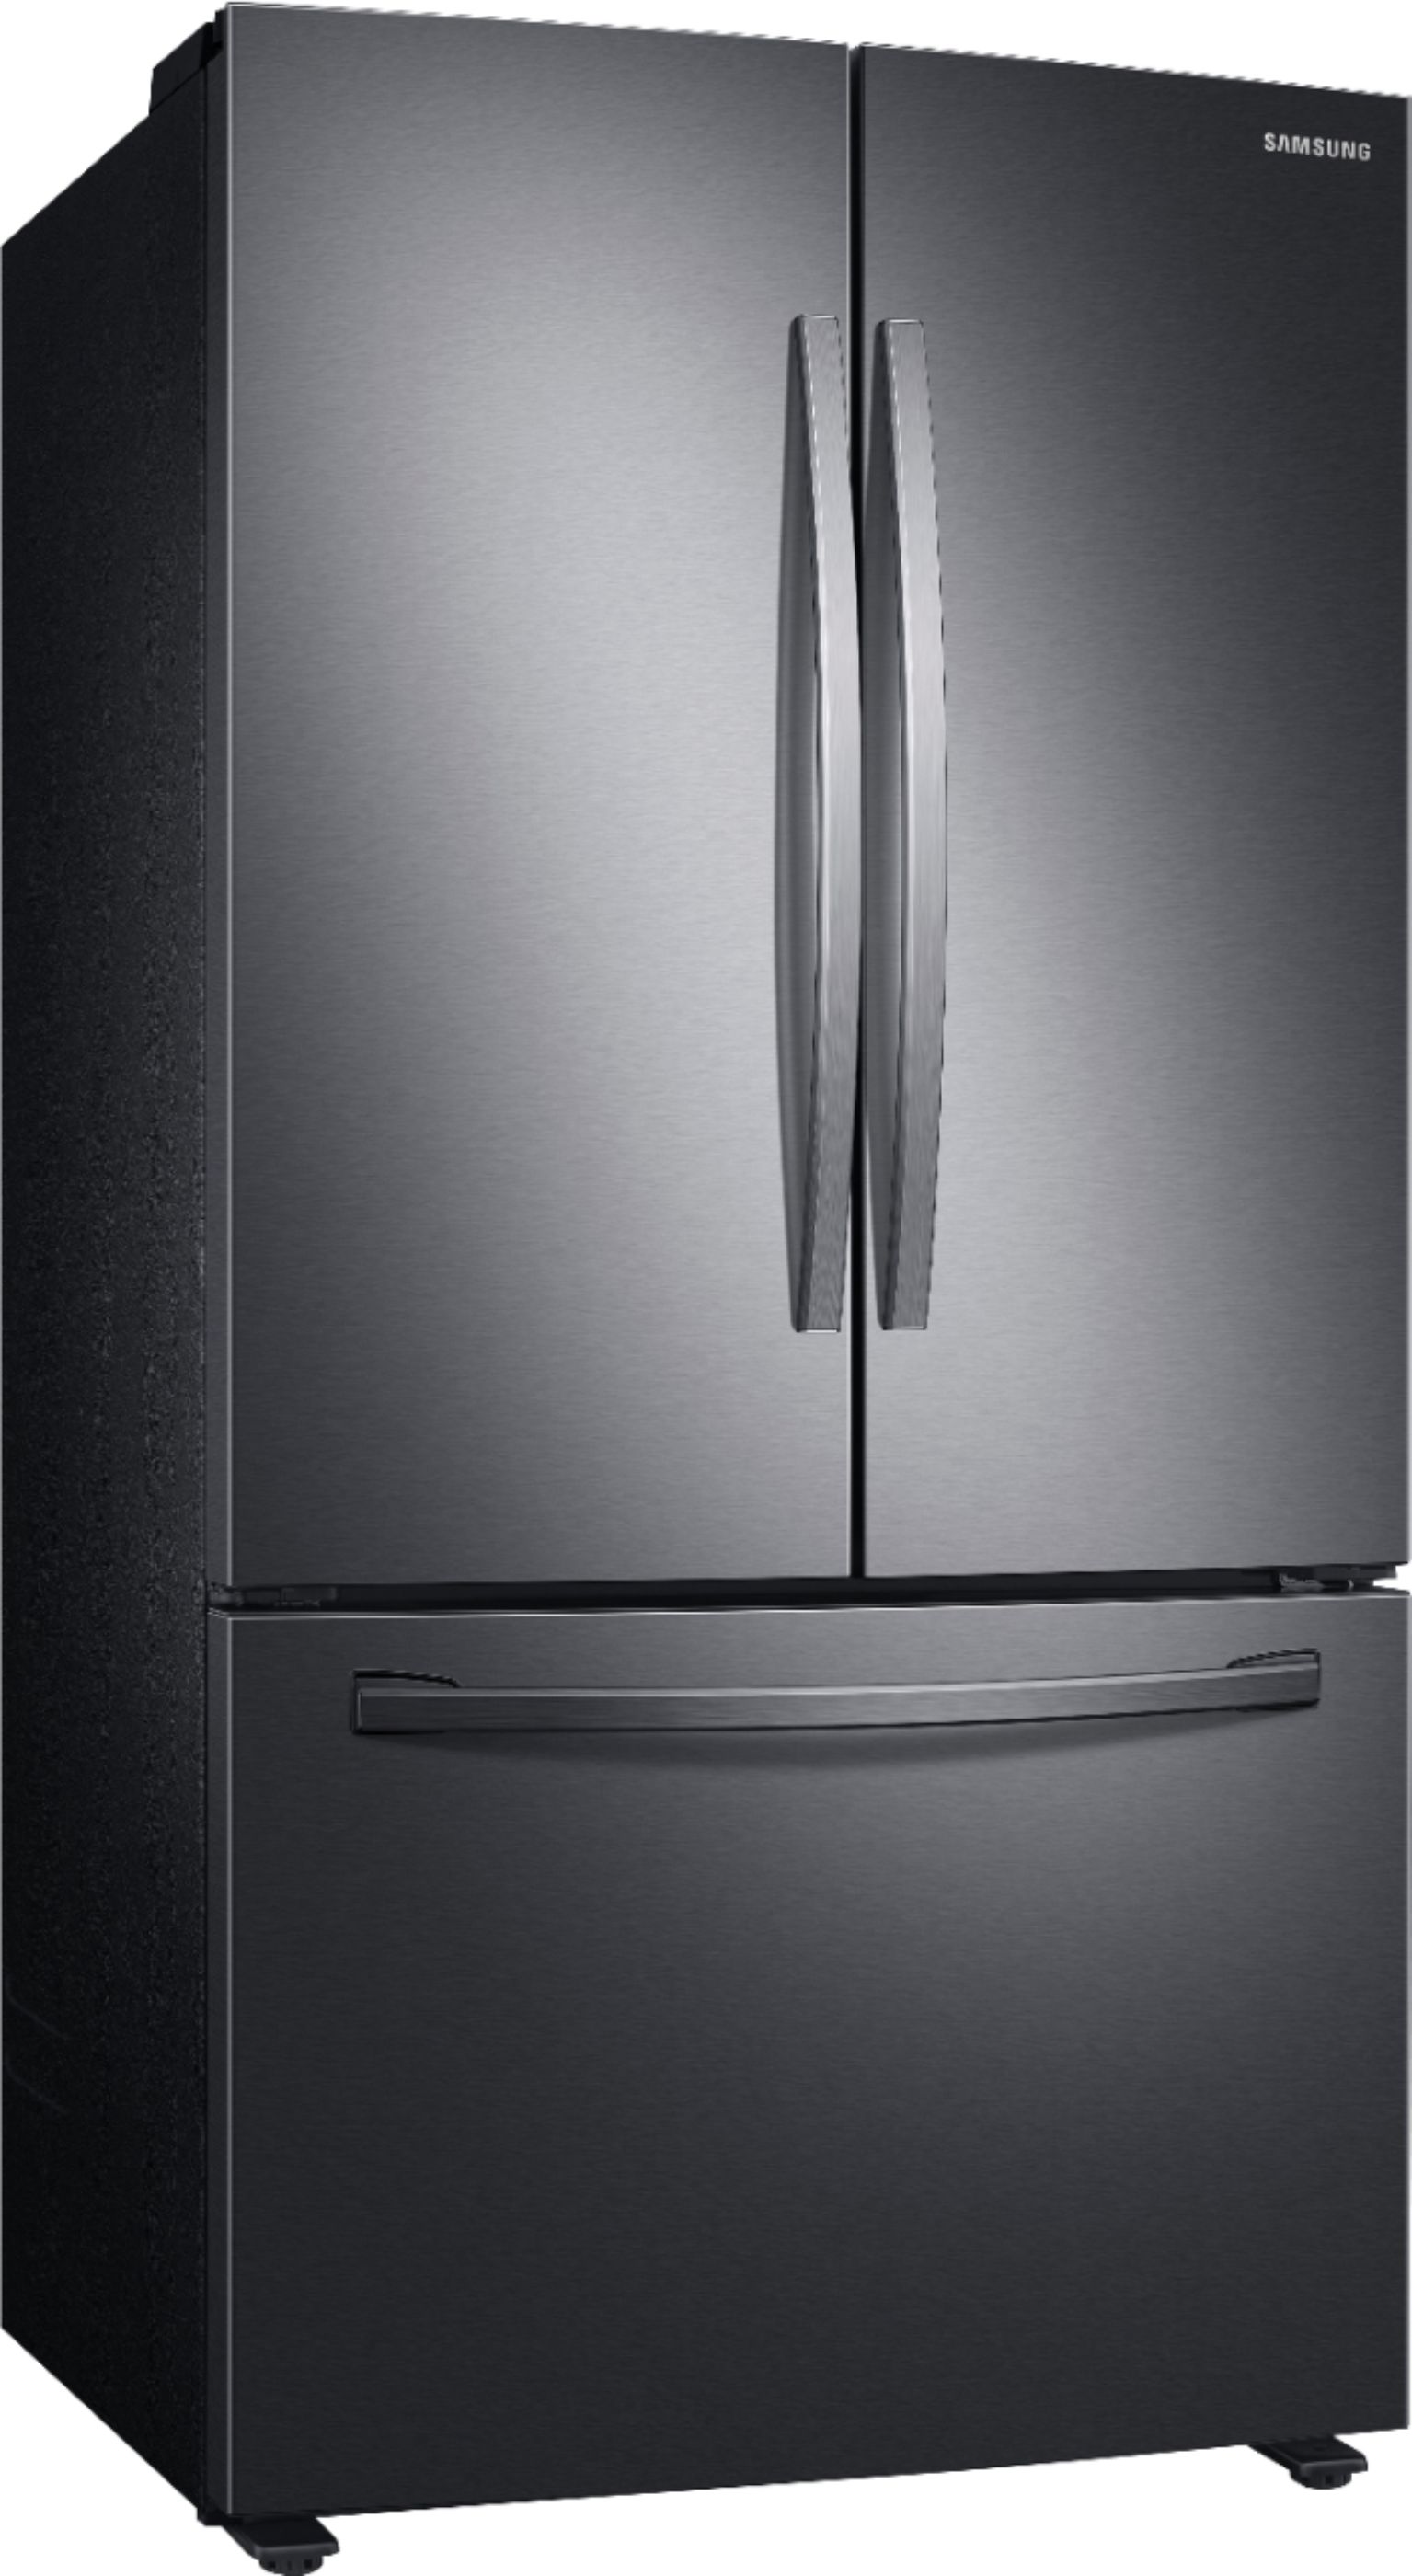 Angle View: Samsung - 25 cu. ft. Large Capacity 4-Door French Door Refrigerator with External Water & Ice Dispenser - Stainless steel